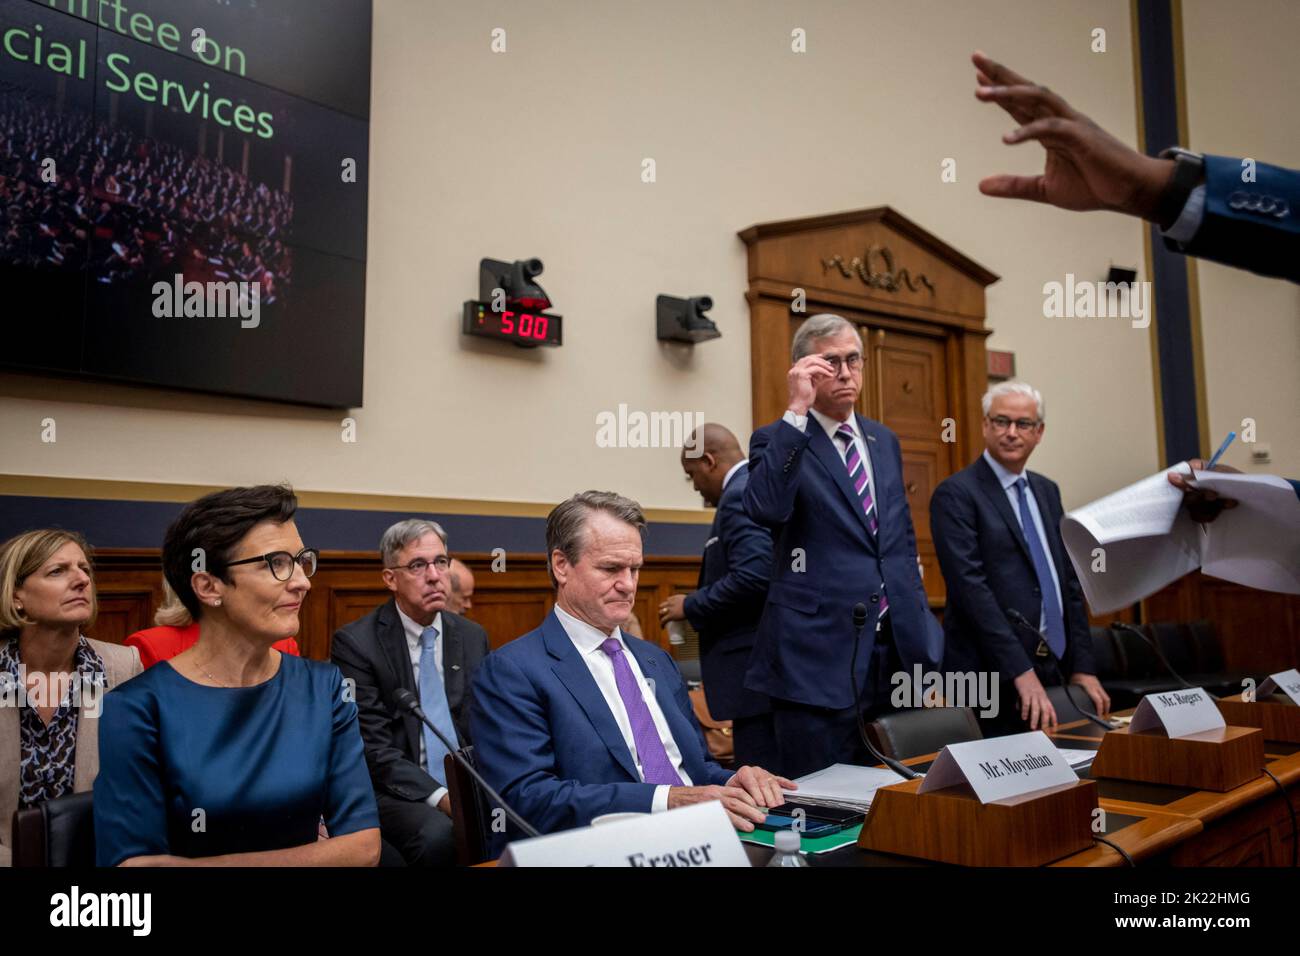 Jane Fraser, CEO, Citigroup, left, Brian Moynihan, Chairman and CEO, Bank of America, second from left, William Rogers Jr., Chairman and CEO, Truist Financial Corporation, second from right, and Charles Scharf, President and CEO, Wells Fargo & Company, right, arrive for a House Committee on Financial Services hearing “Holding Megabanks Accountable: Oversight of America’s Largest Consumer Facing Banks” in the Rayburn House Office Building in Washington, DC, USA, Wednesday, September 21, 2022. Photo by Rod Lamkey/CNP/ABACAPRESS.COM Stock Photo